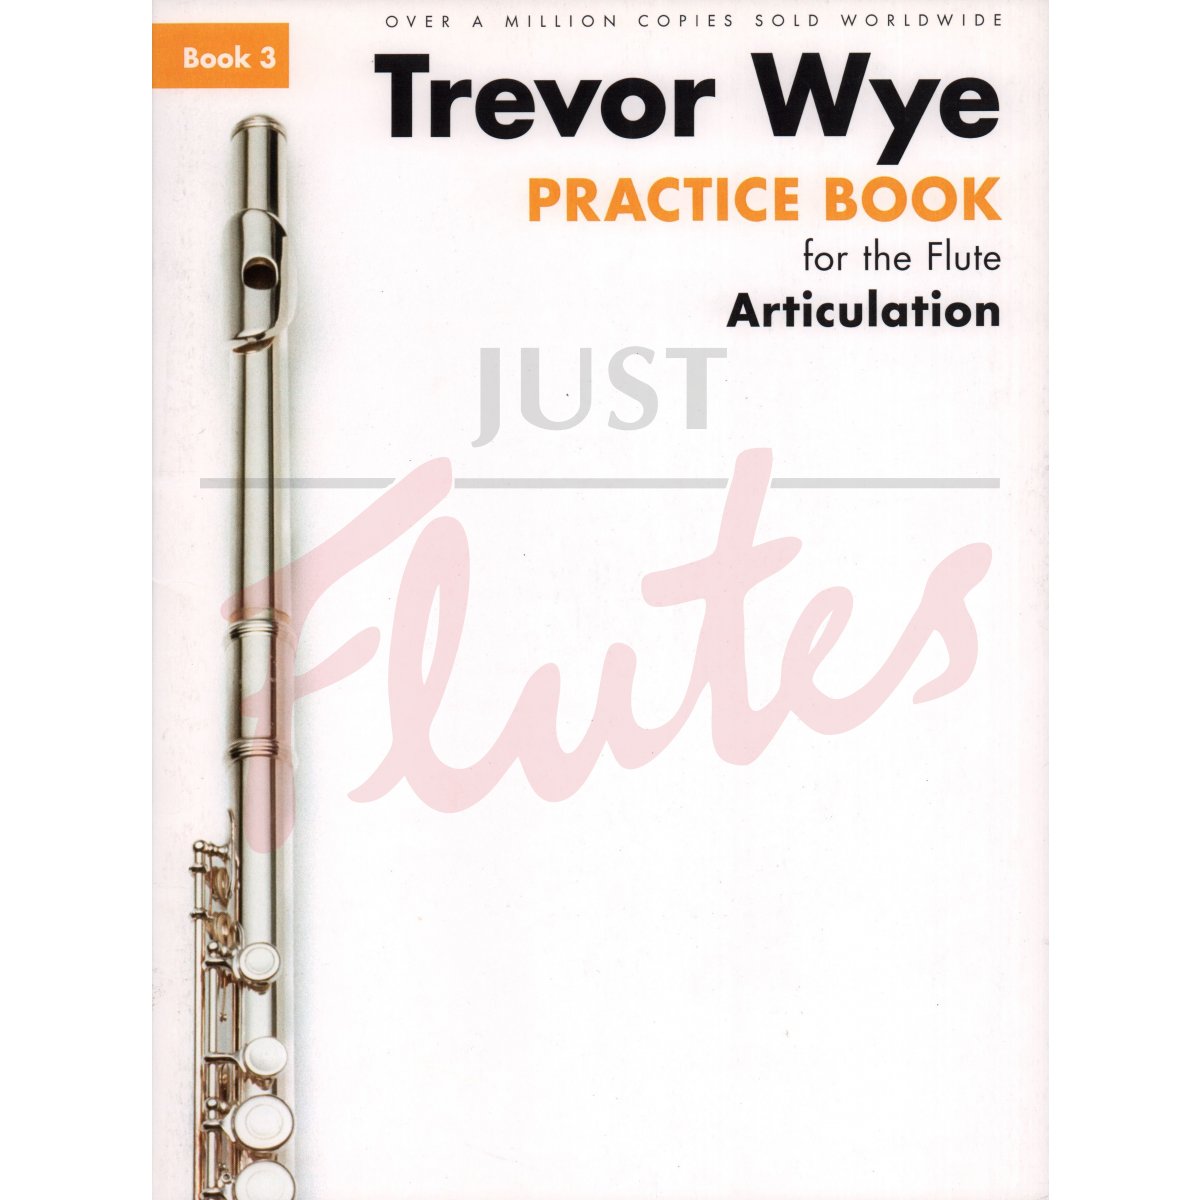 Practice Book for the Flute: Articulation